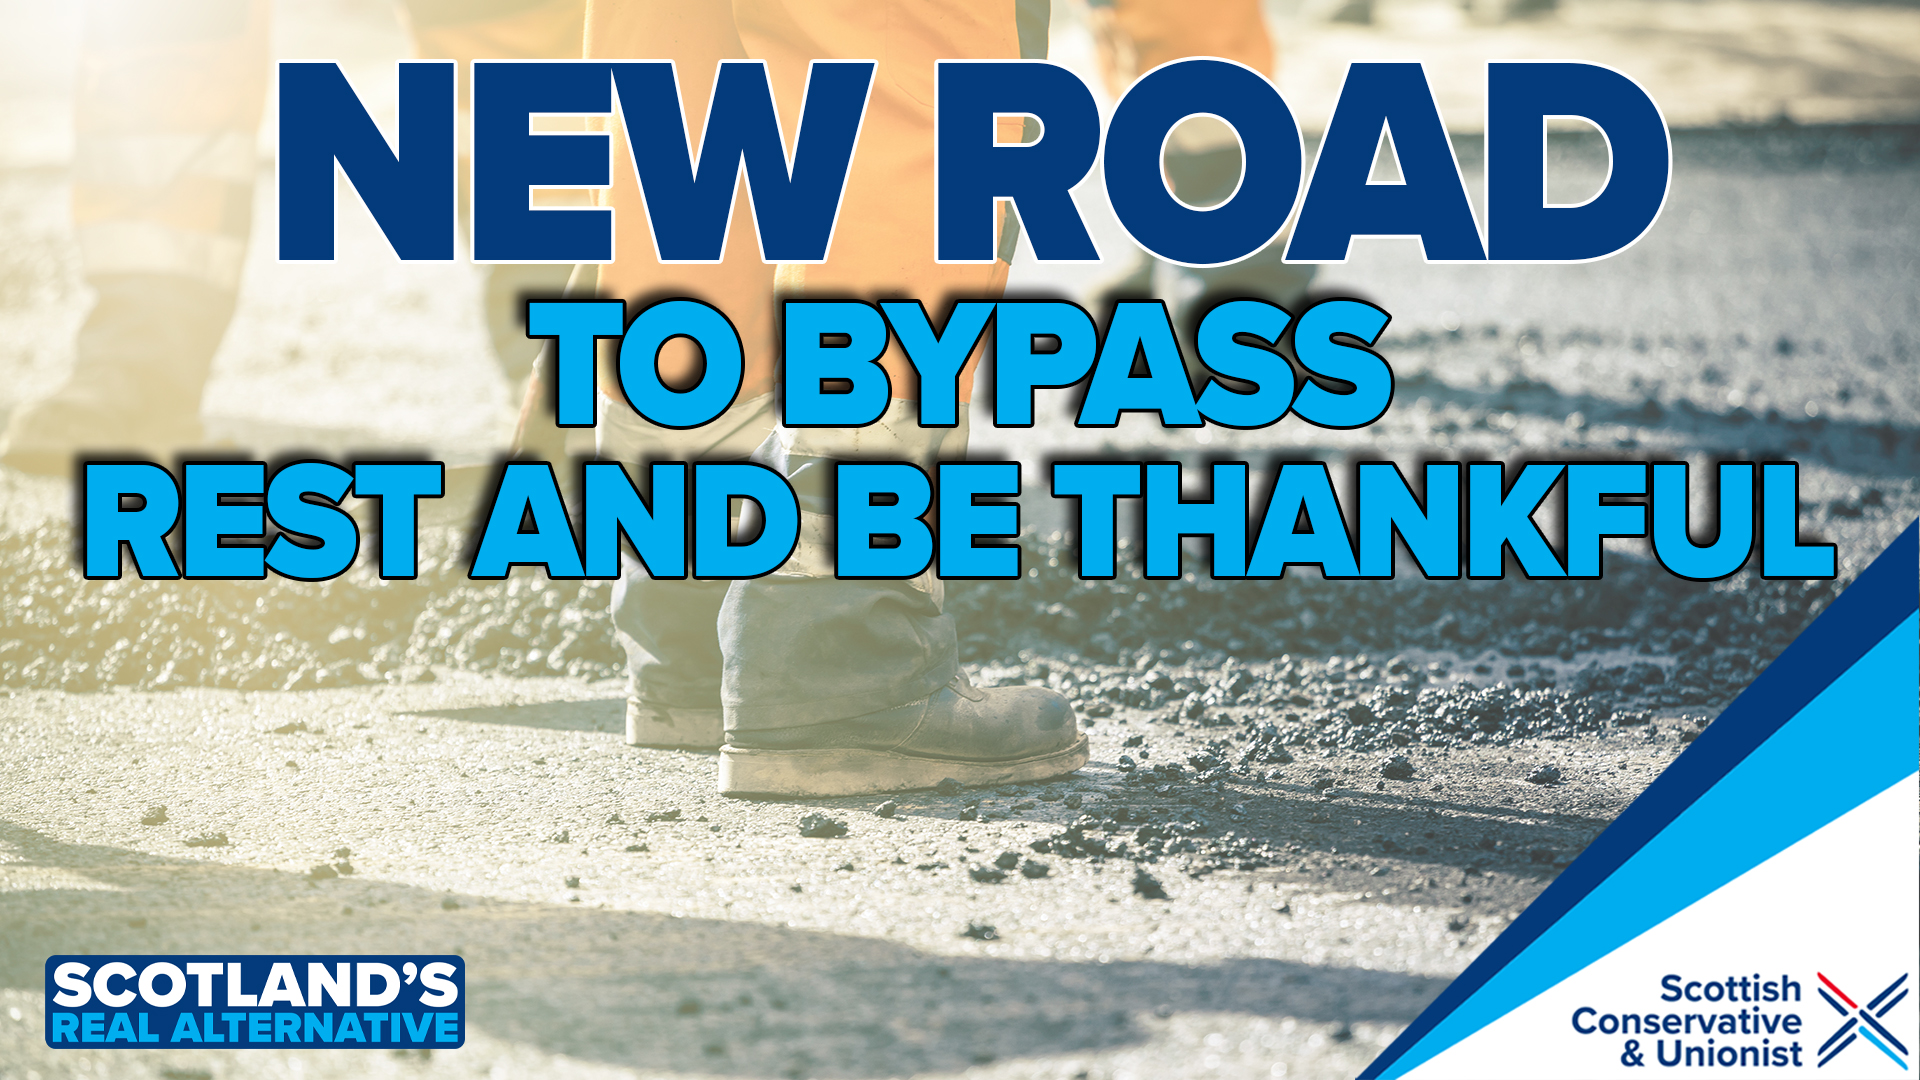 NEW ROAD TO BYPASS REST AND BE THANKFUL Web Graphic Quick guide to key Scottish Conservative policies